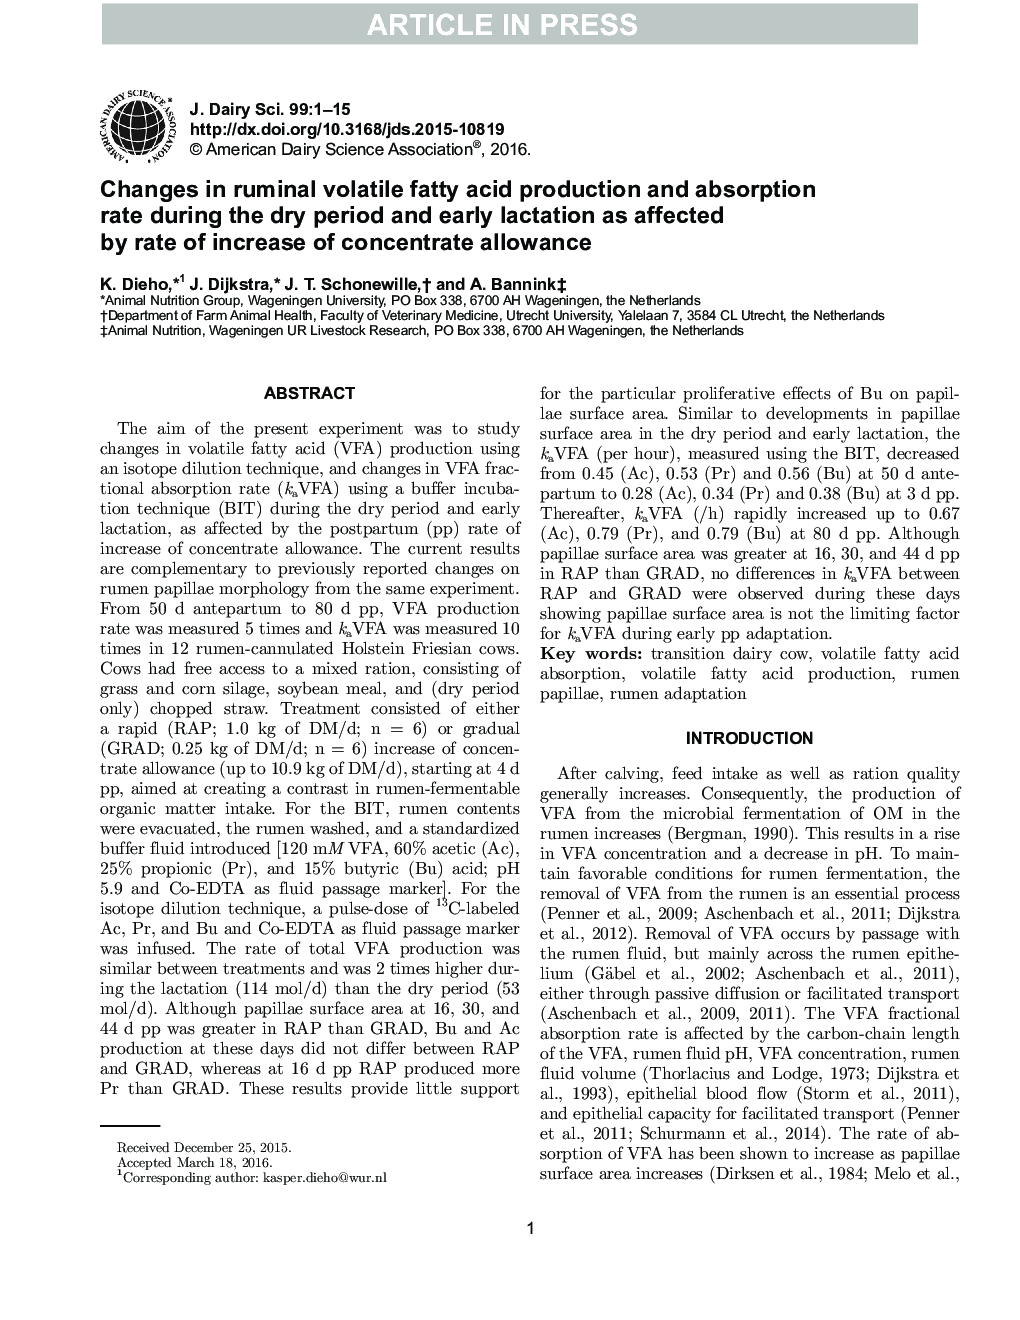 Changes in ruminal volatile fatty acid production and absorption rate during the dry period and early lactation as affected by rate of increase of concentrate allowance